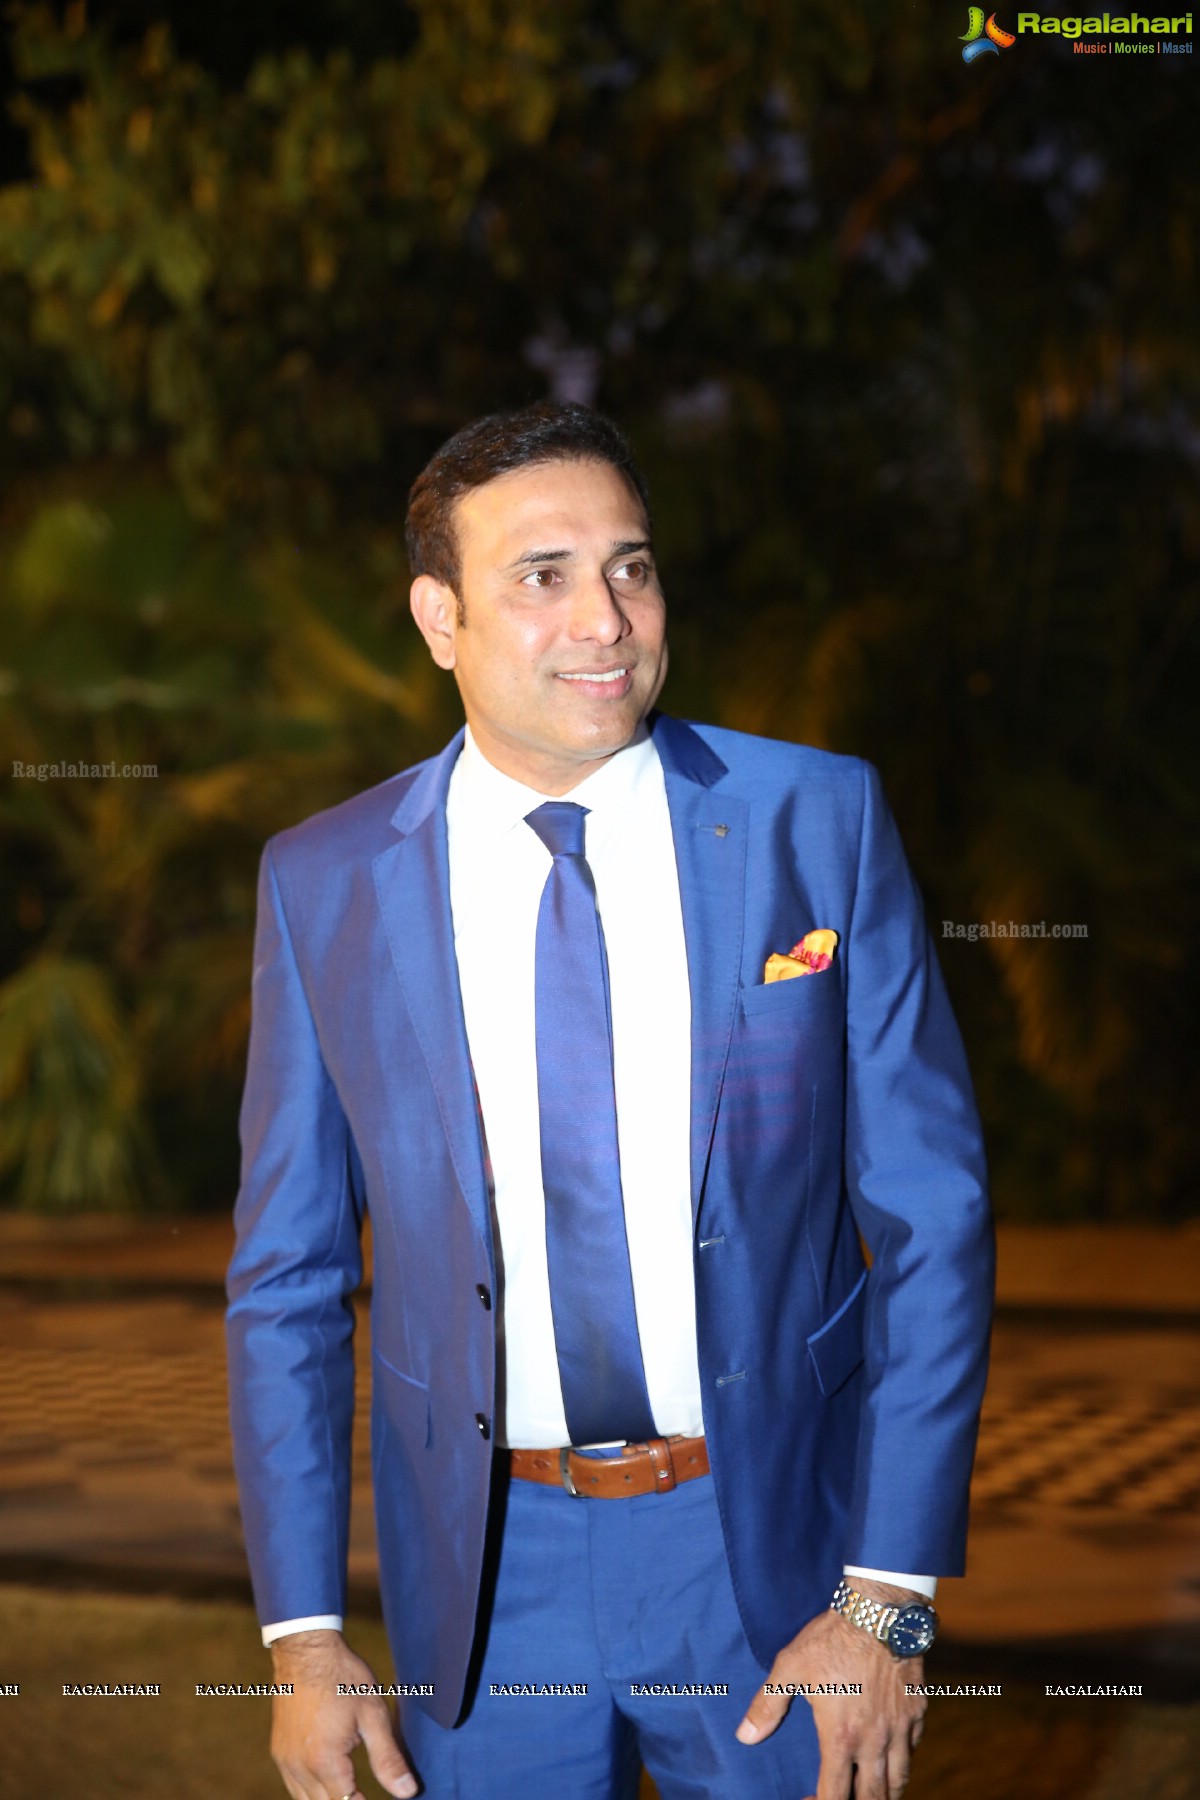 VVS Laxman Releases His Autobiography, '281 and Beyond'